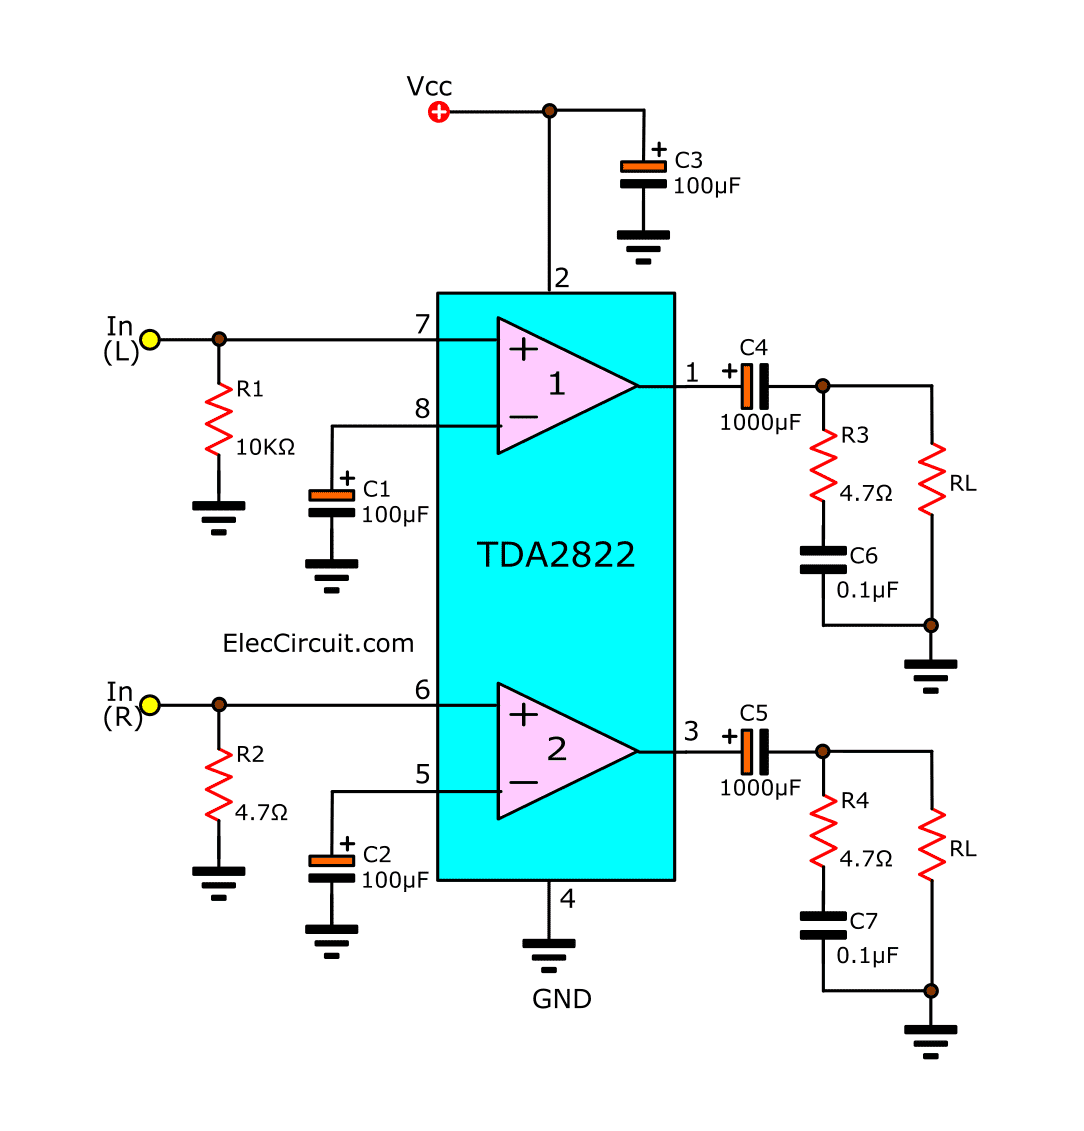 pcb-and-components-layout